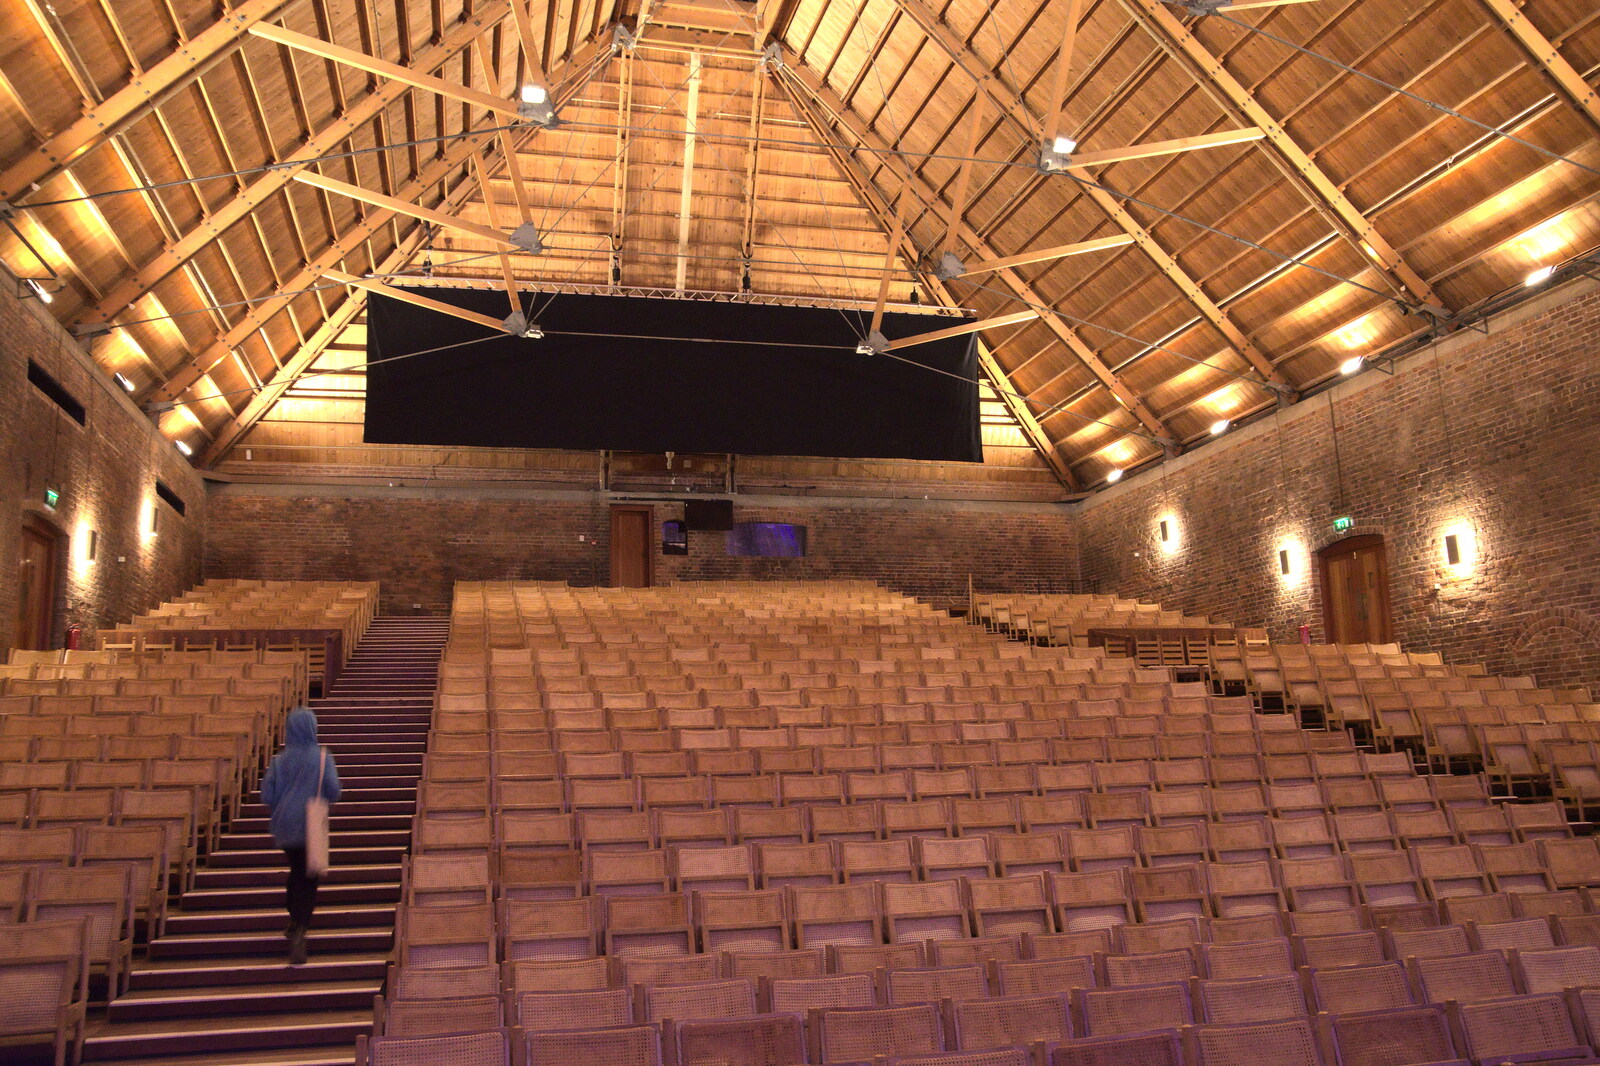 We explore the impressive performance hall from The Aldeburgh Food Festival, Snape Maltings, Suffolk - 25th September 2022